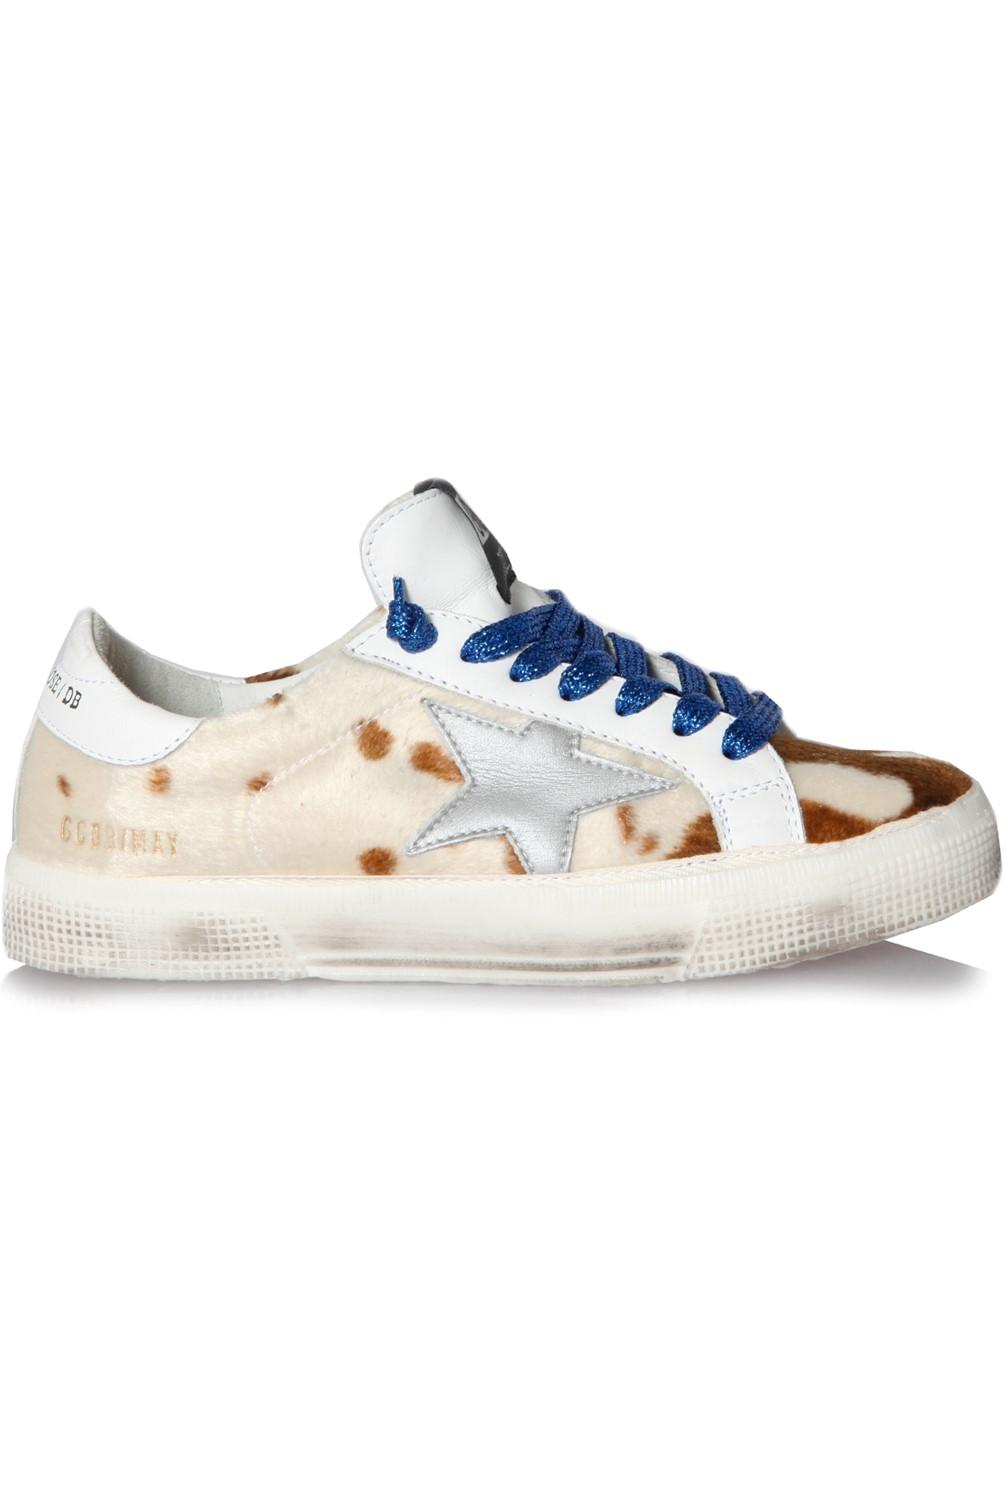 Golden Goose Deluxe Brand Goose May Cow Leather Sneakers in Brown - Lyst